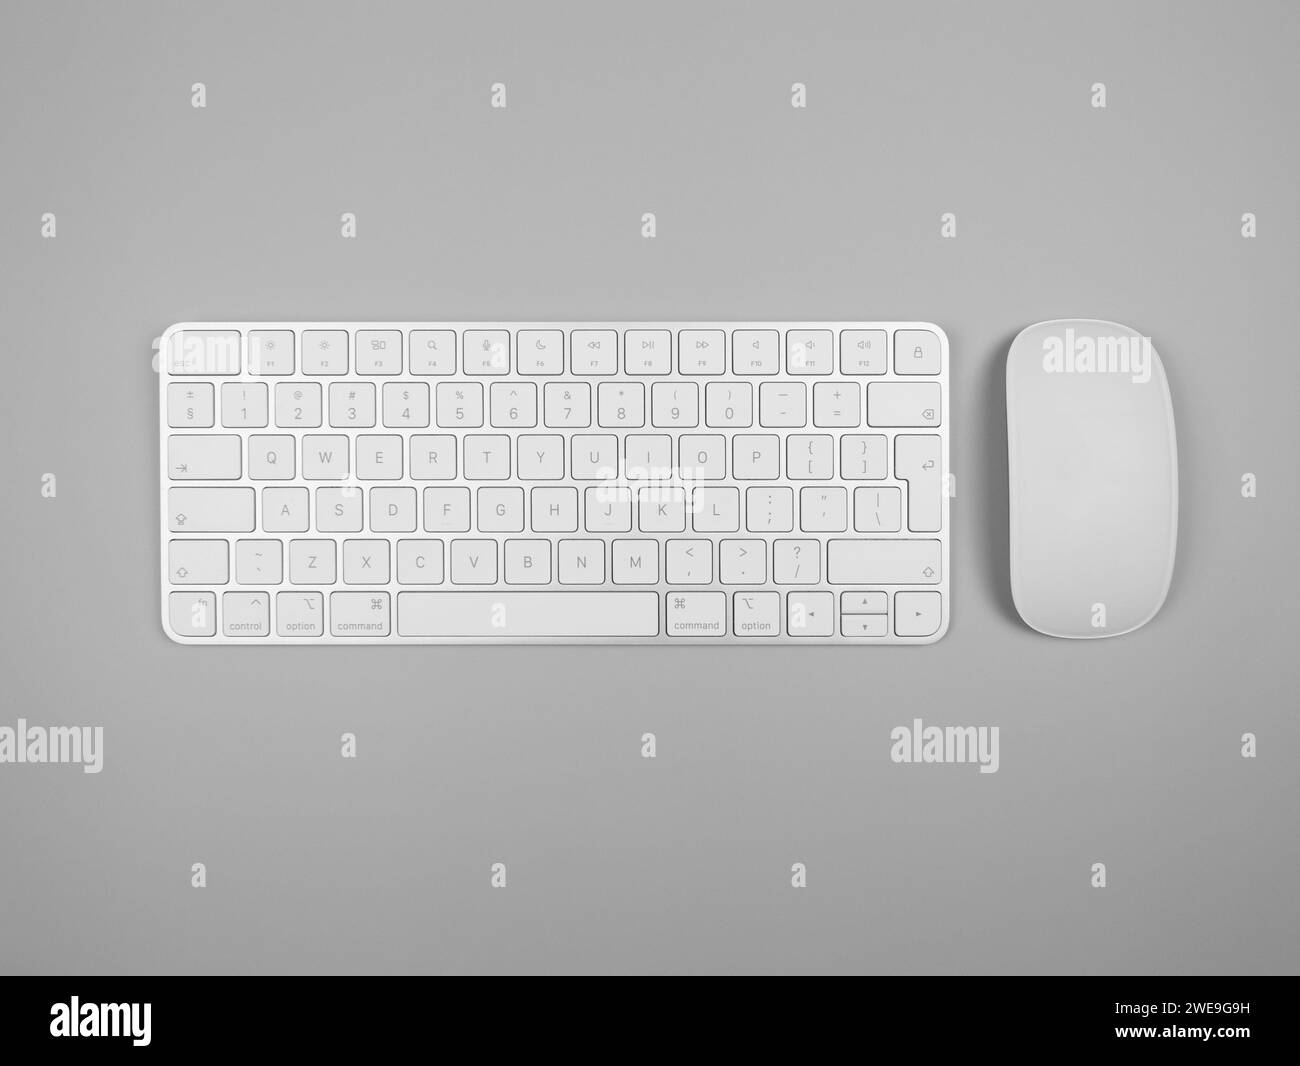 Top view of white keyboard and mouse on light grey background. Modern office flat lay, copy space. Stock Photo